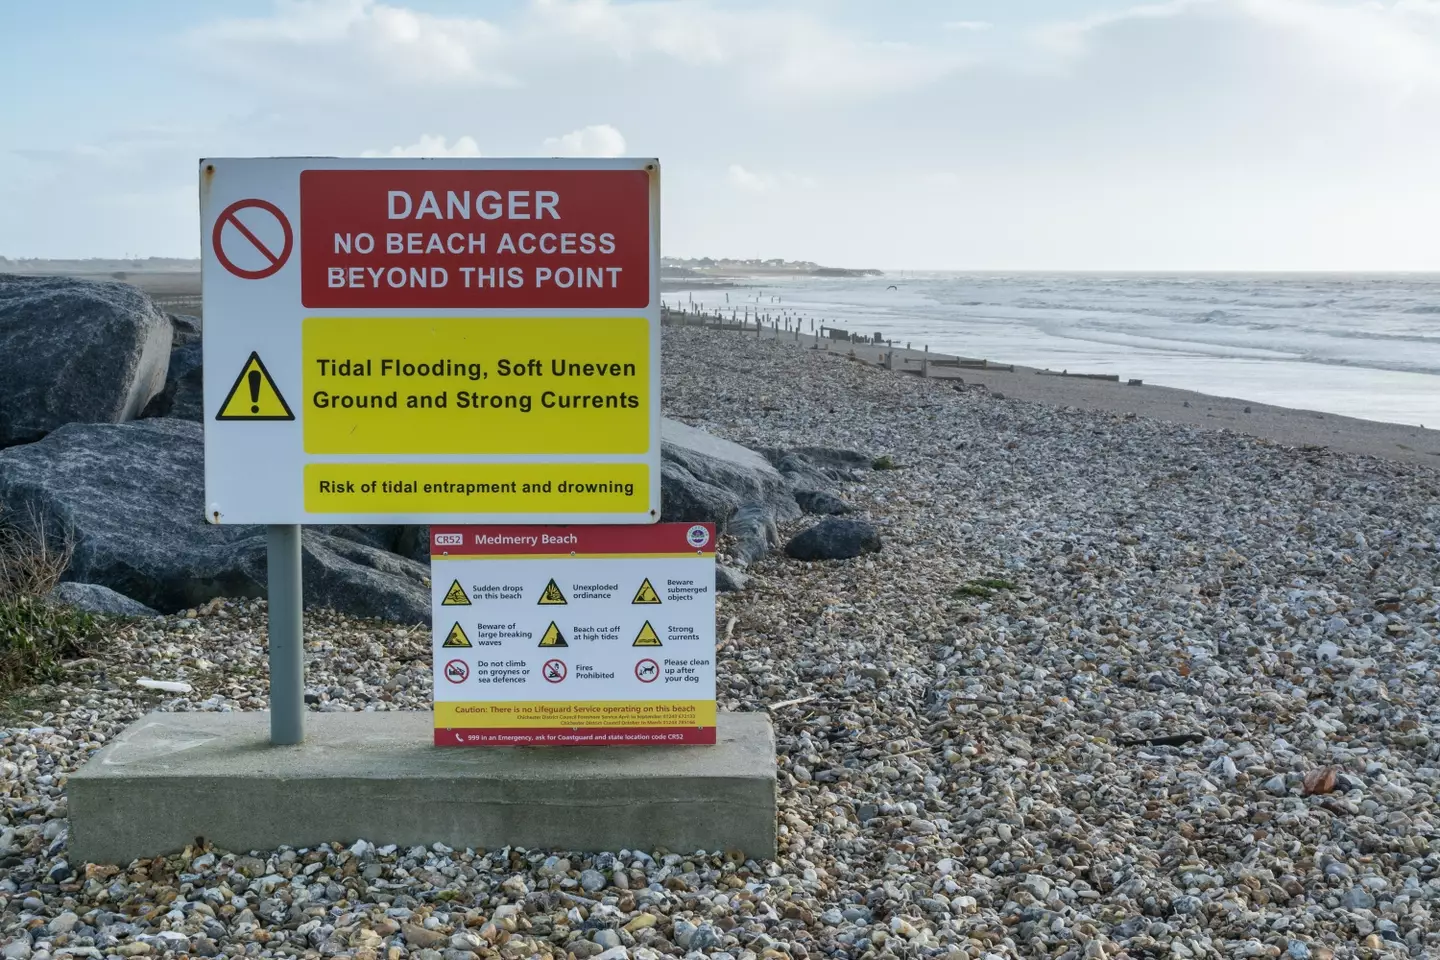 Members of the public are banned from using the beach.